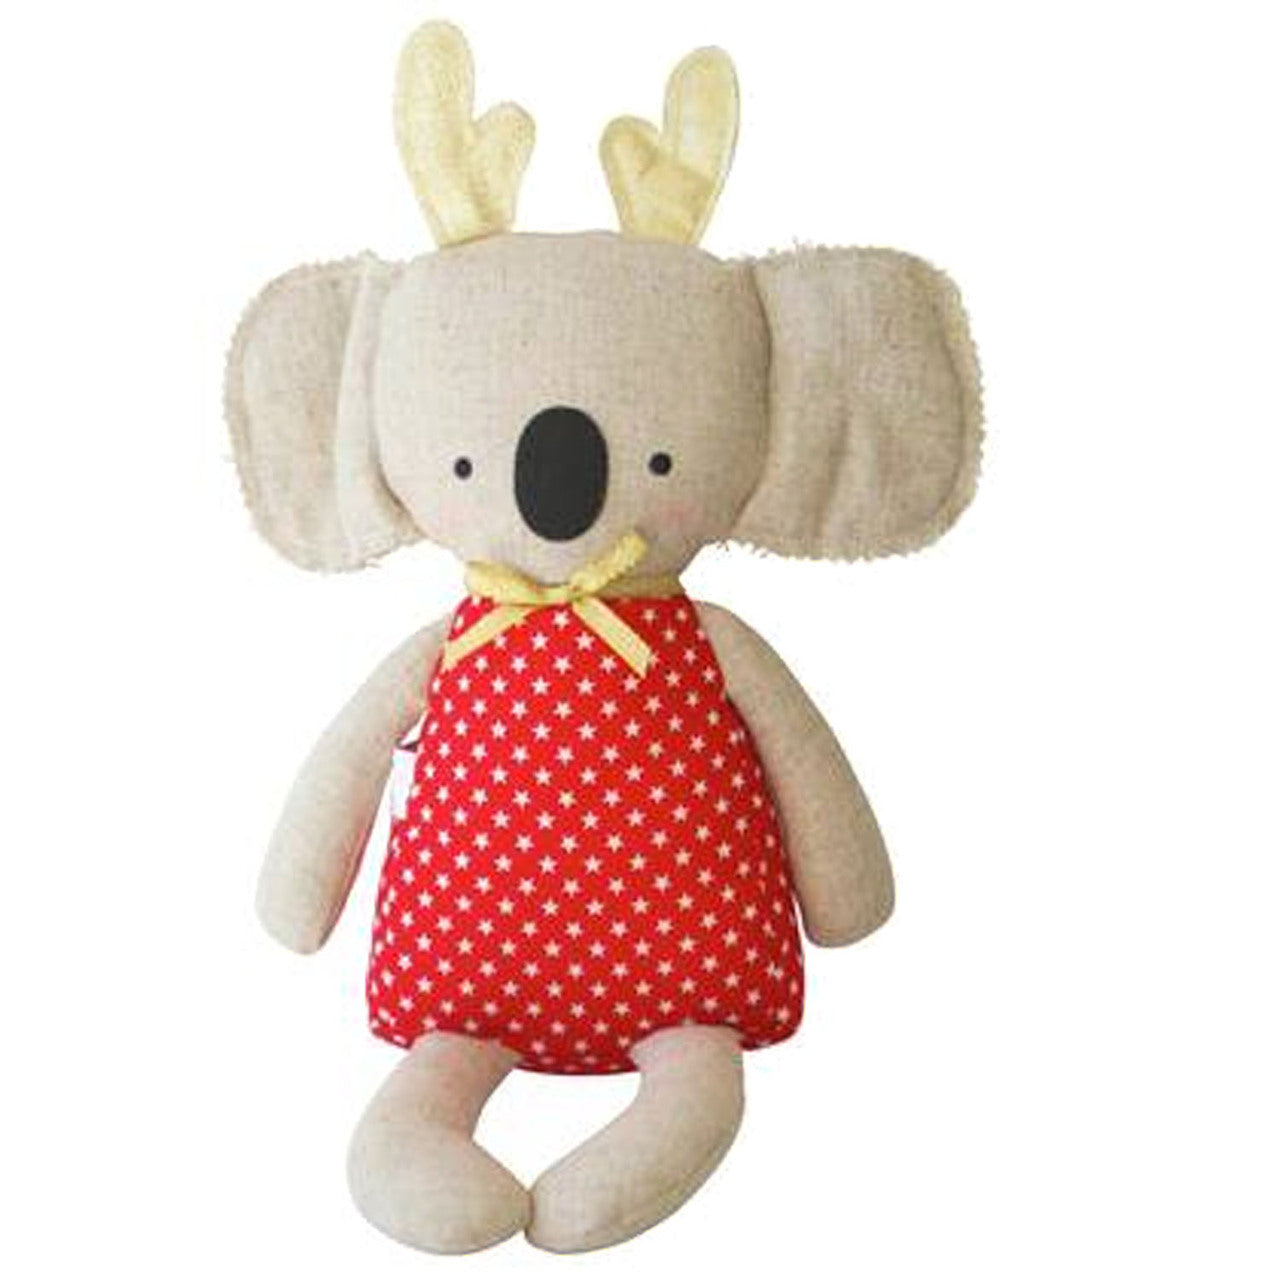 Koala with Antlers Doll, Red Star